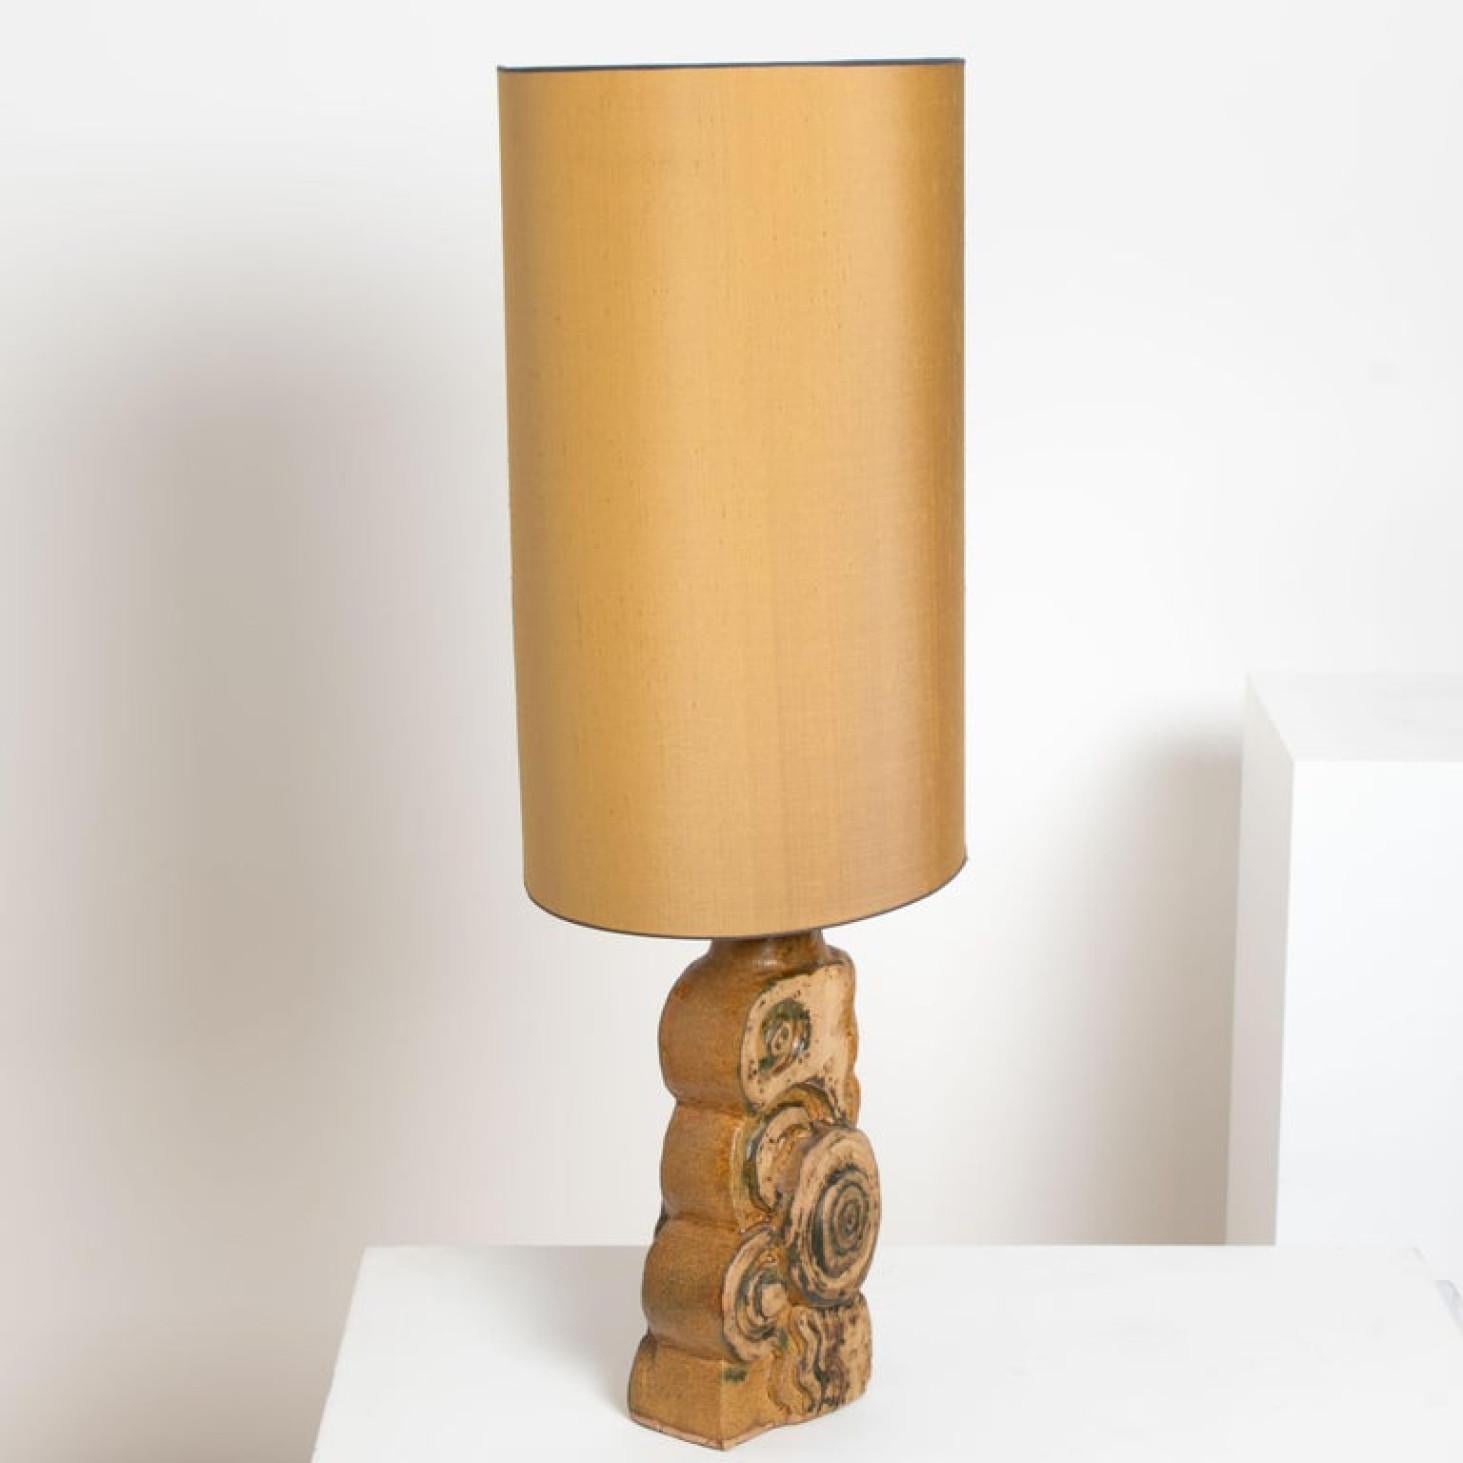 B. Rooke Ceramic Lamp with New Custom Made Lampshade by René Houben, 1960s For Sale 3